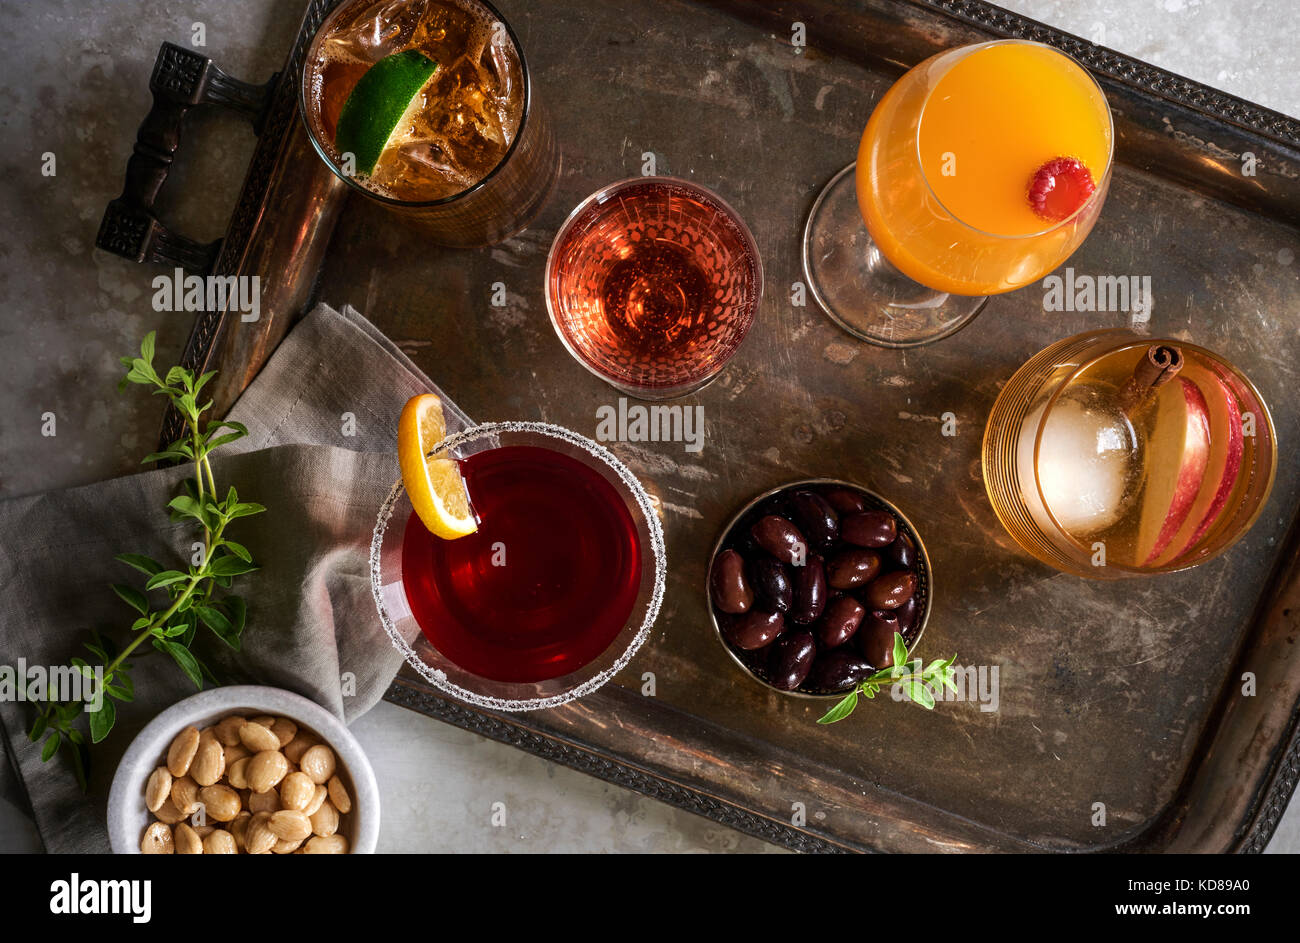 Rustic metal bar top with tray and multiple colorful cocktails. Garnished with fresh citrus wedges and fresh herbs. Stock Photo